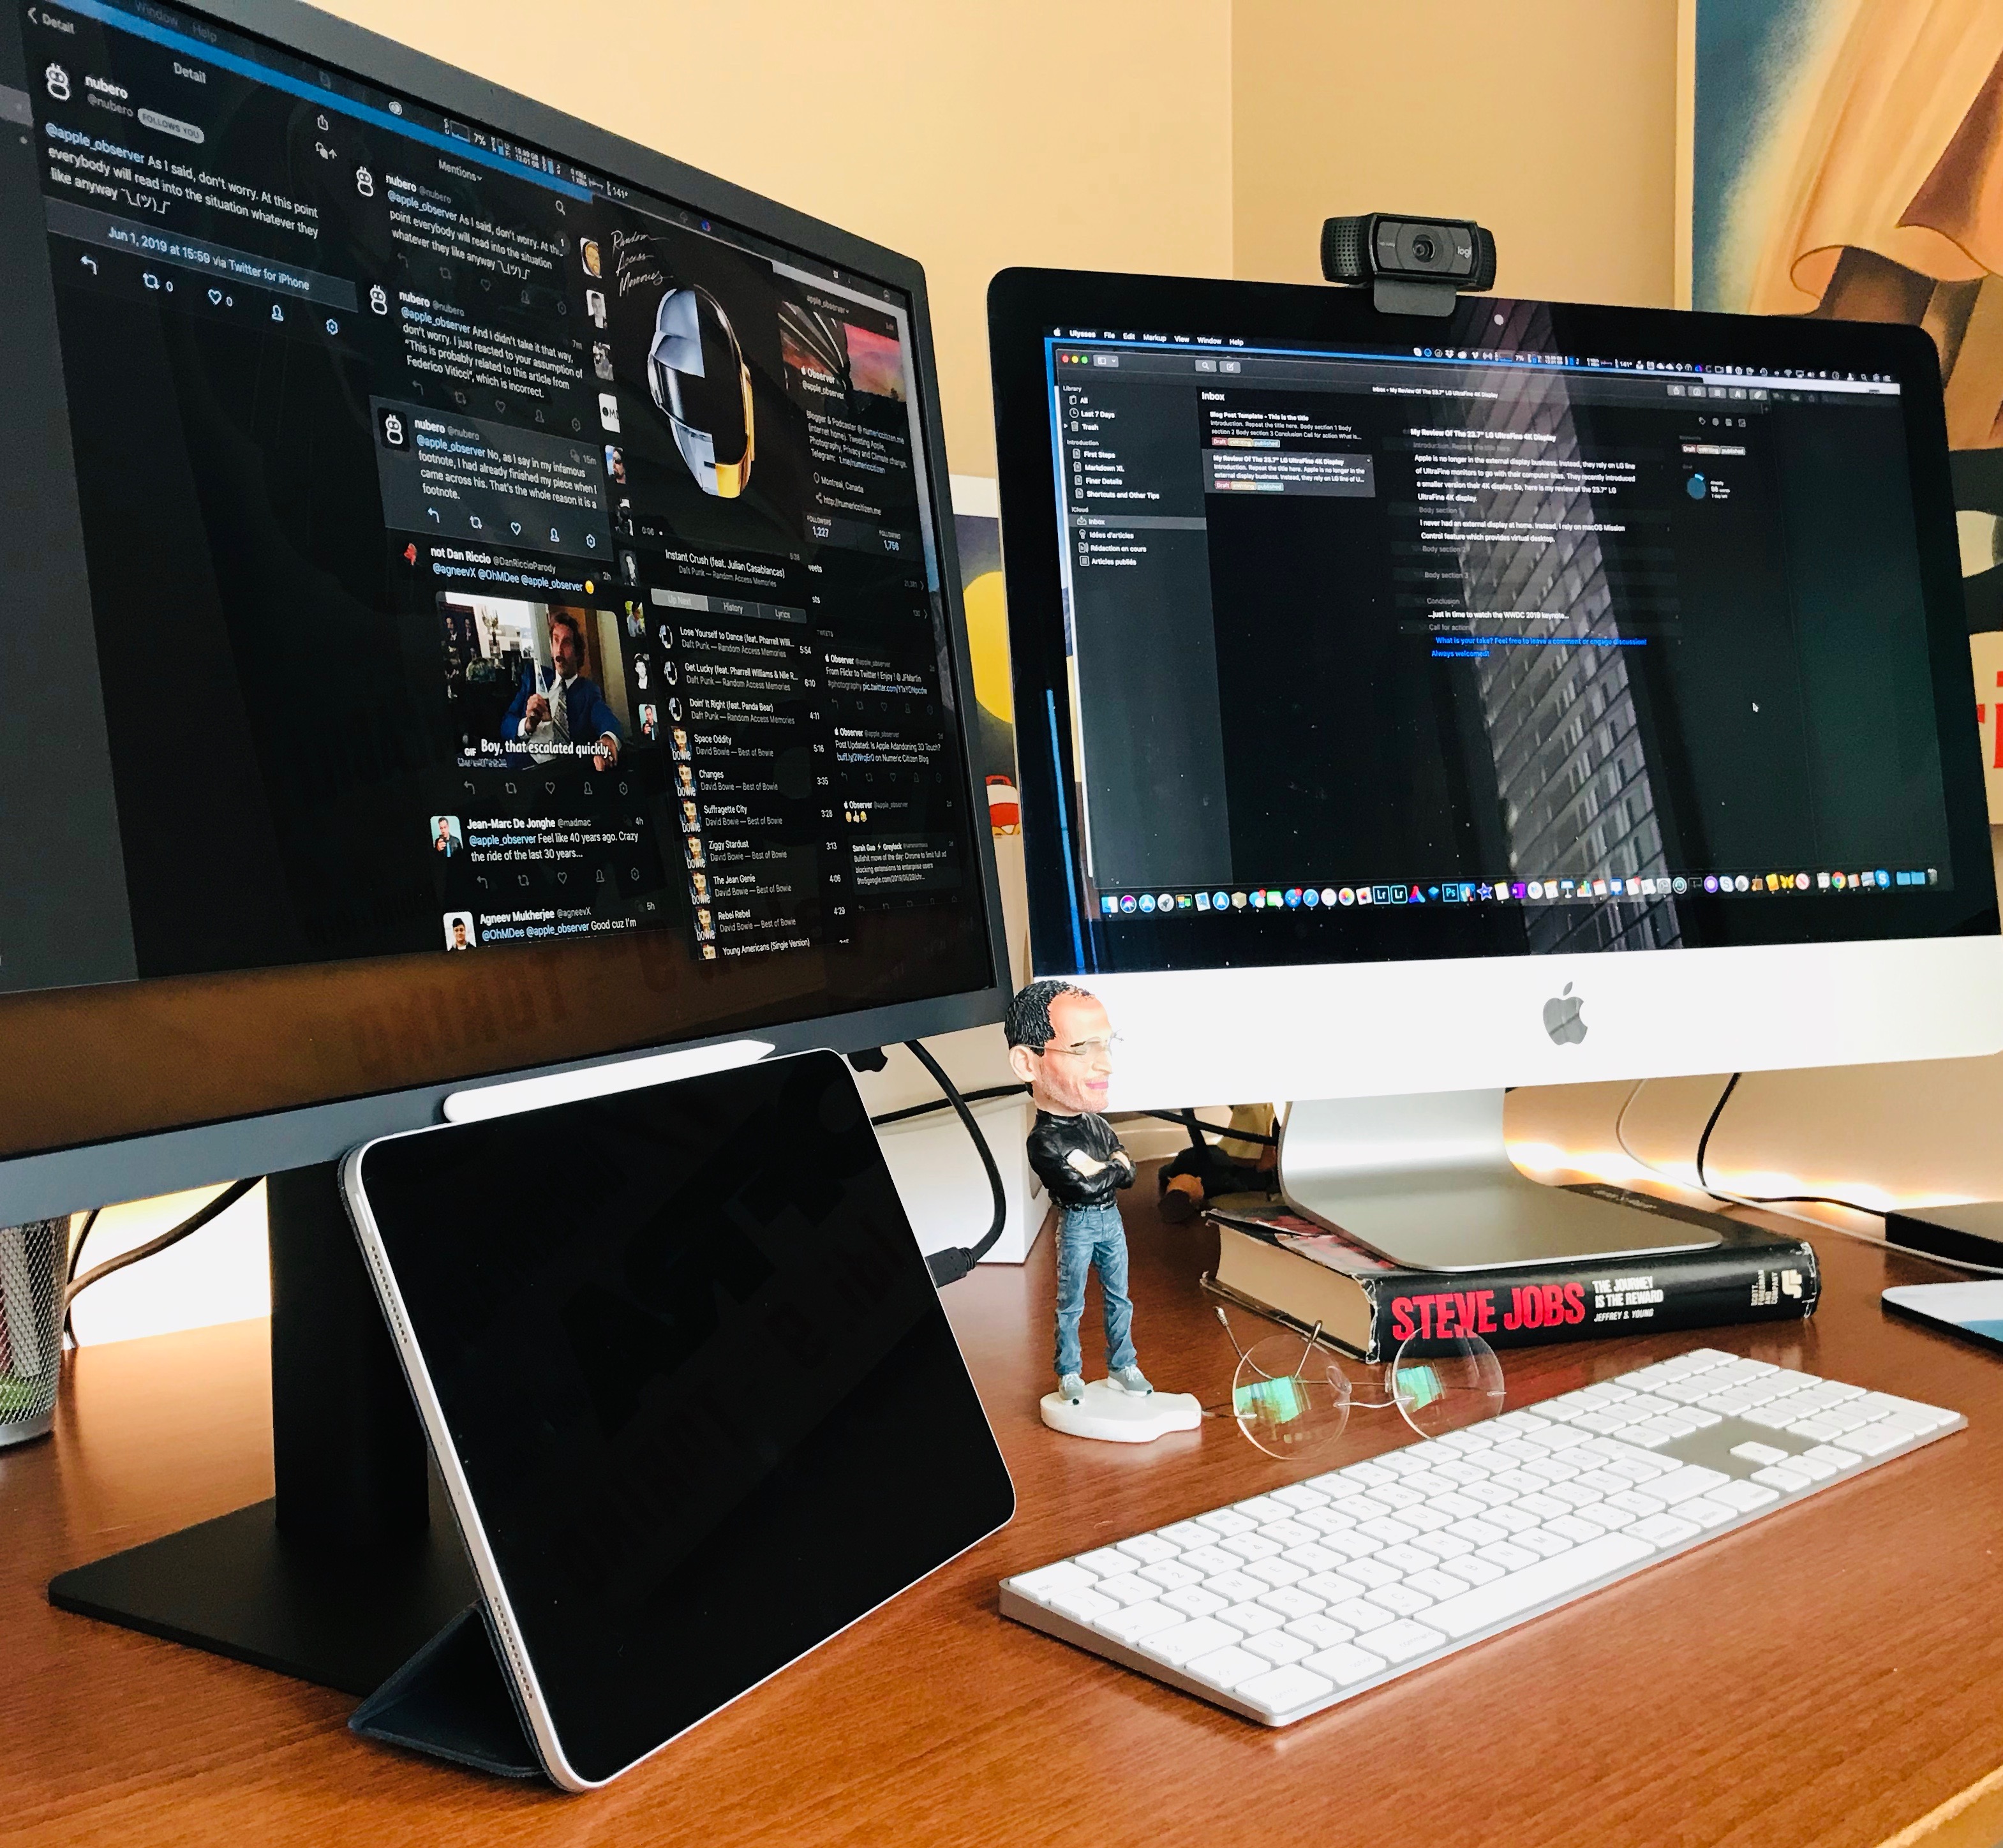 My Review Of The 23.7” LG UltraFine 4K Display - Numeric Citizen Blog